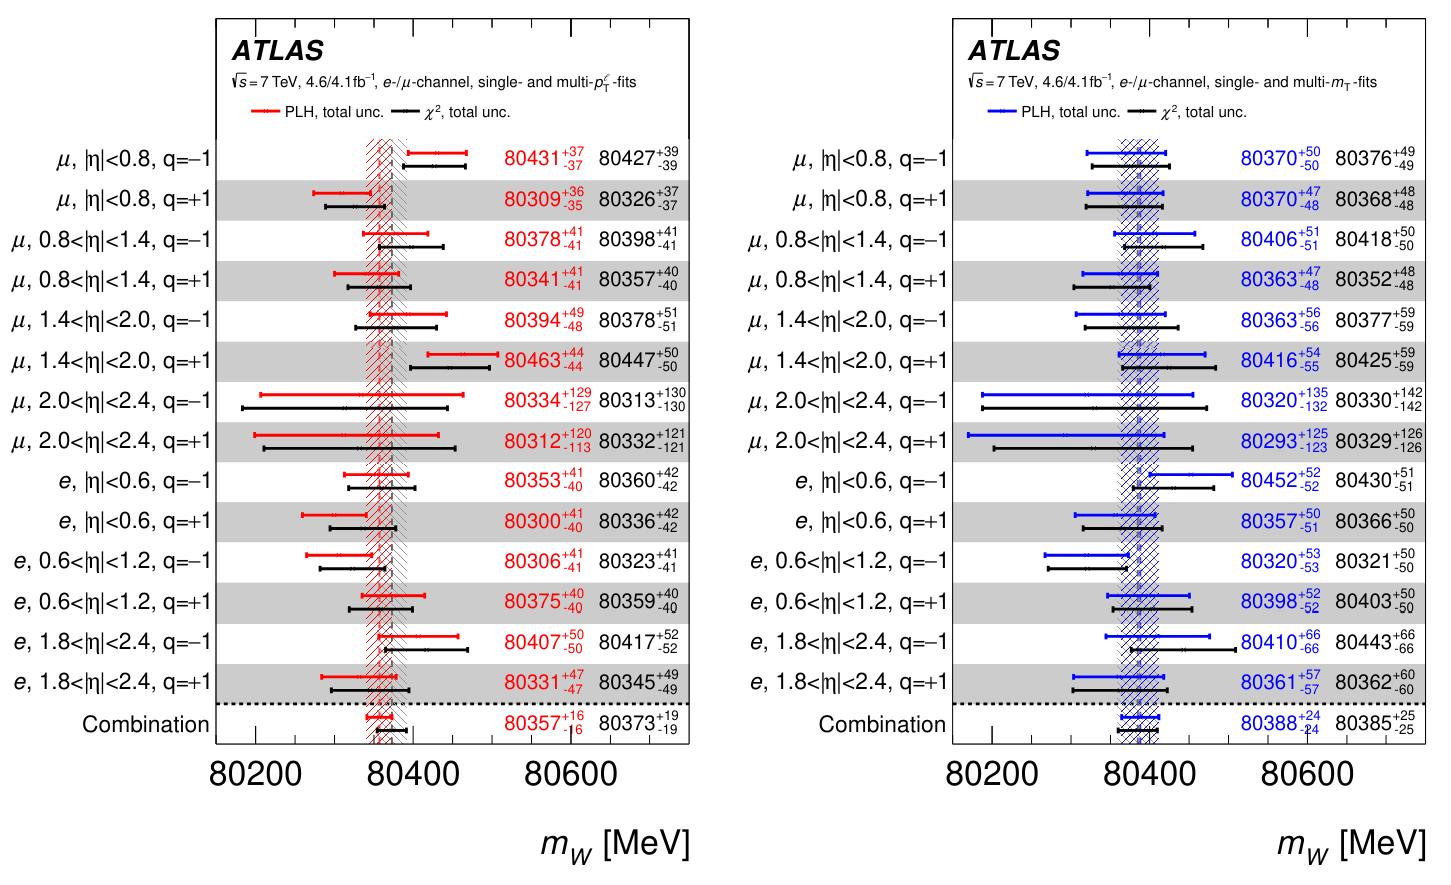 Comparison of measurements of the W boson mass (mW) in MeV by the ATLAS experiment at LHC, showing individual channel results in red (left) and combined results in blue (right), providing critical insights into the Standard Model.